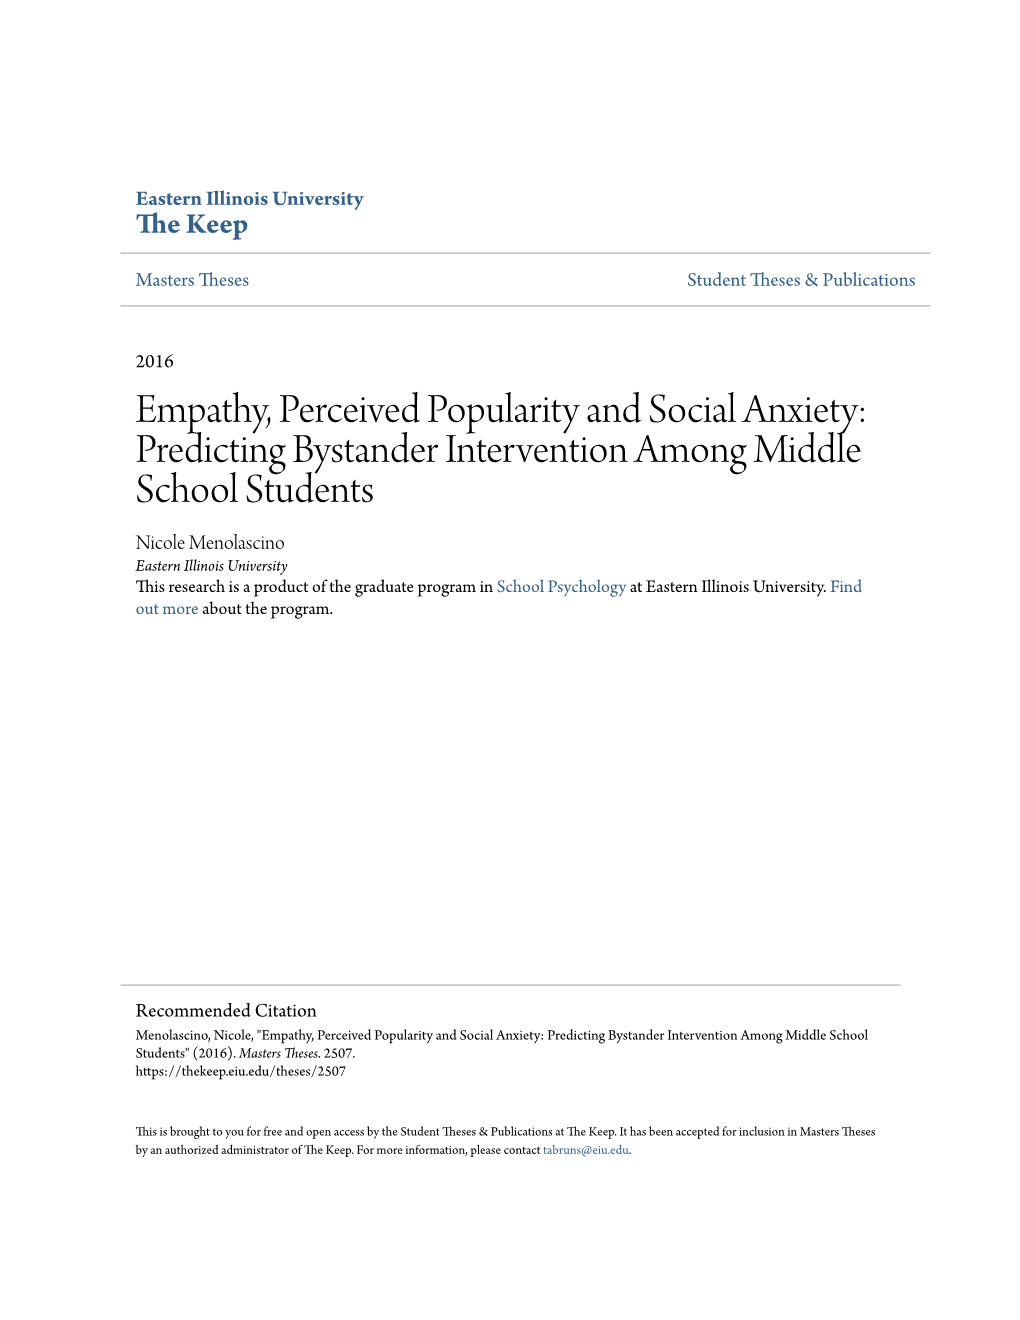 Empathy, Perceived Popularity and Social Anxiety